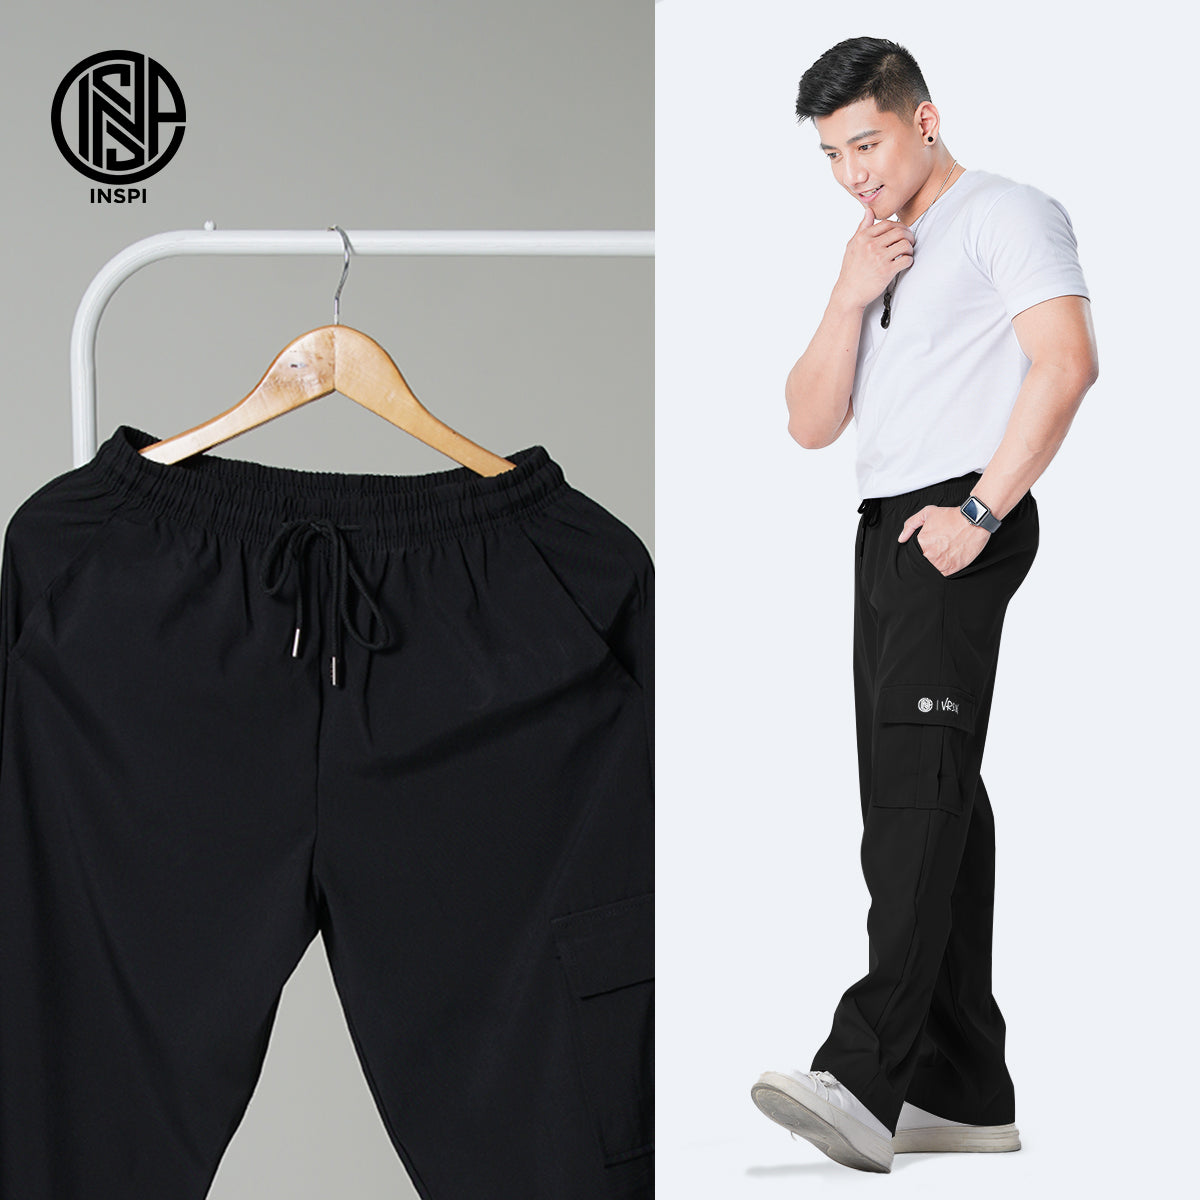 INSPI x Vrix Cargo Pants with Drawstring and Pockets.